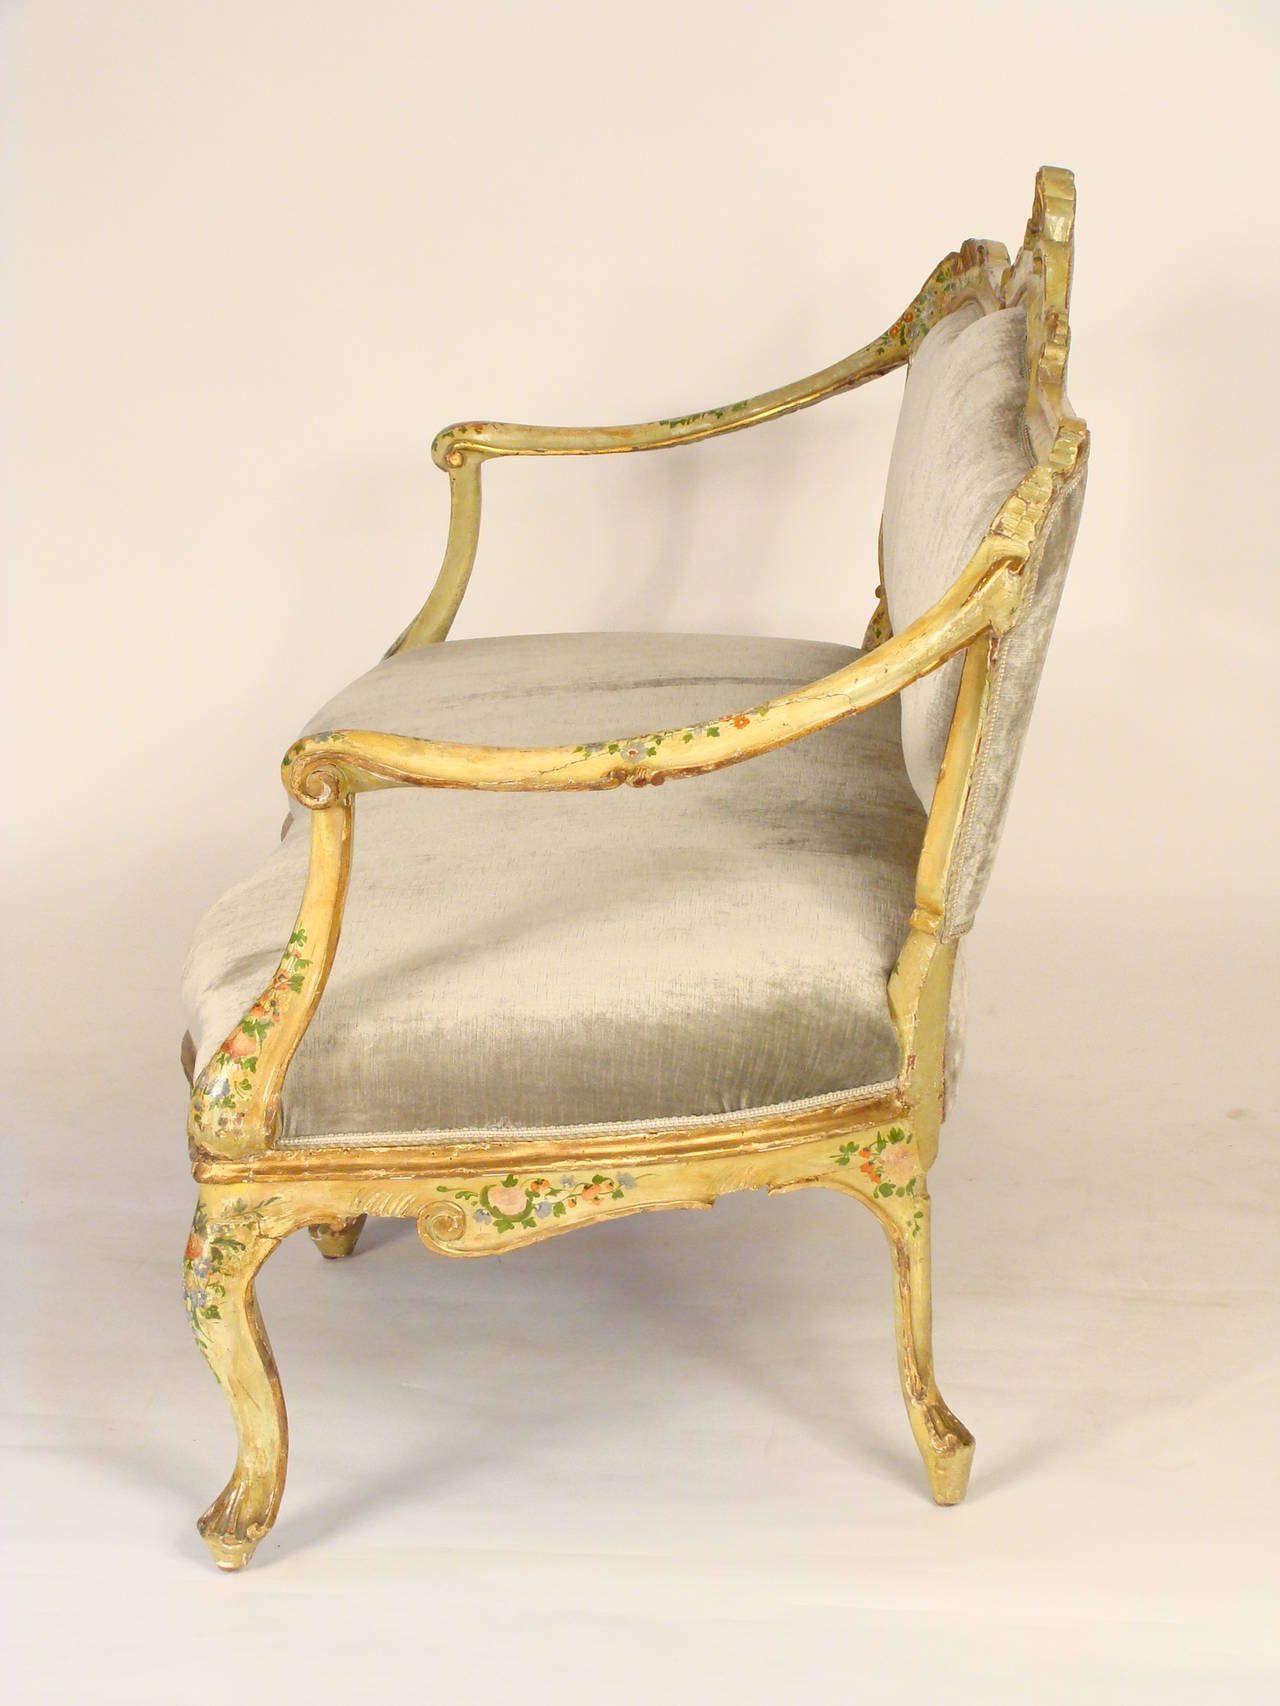 Painted Italian Louis XV style settee, circa 1920. Having nice old original paint. This settee has a deep seat which makes it very comfortable.